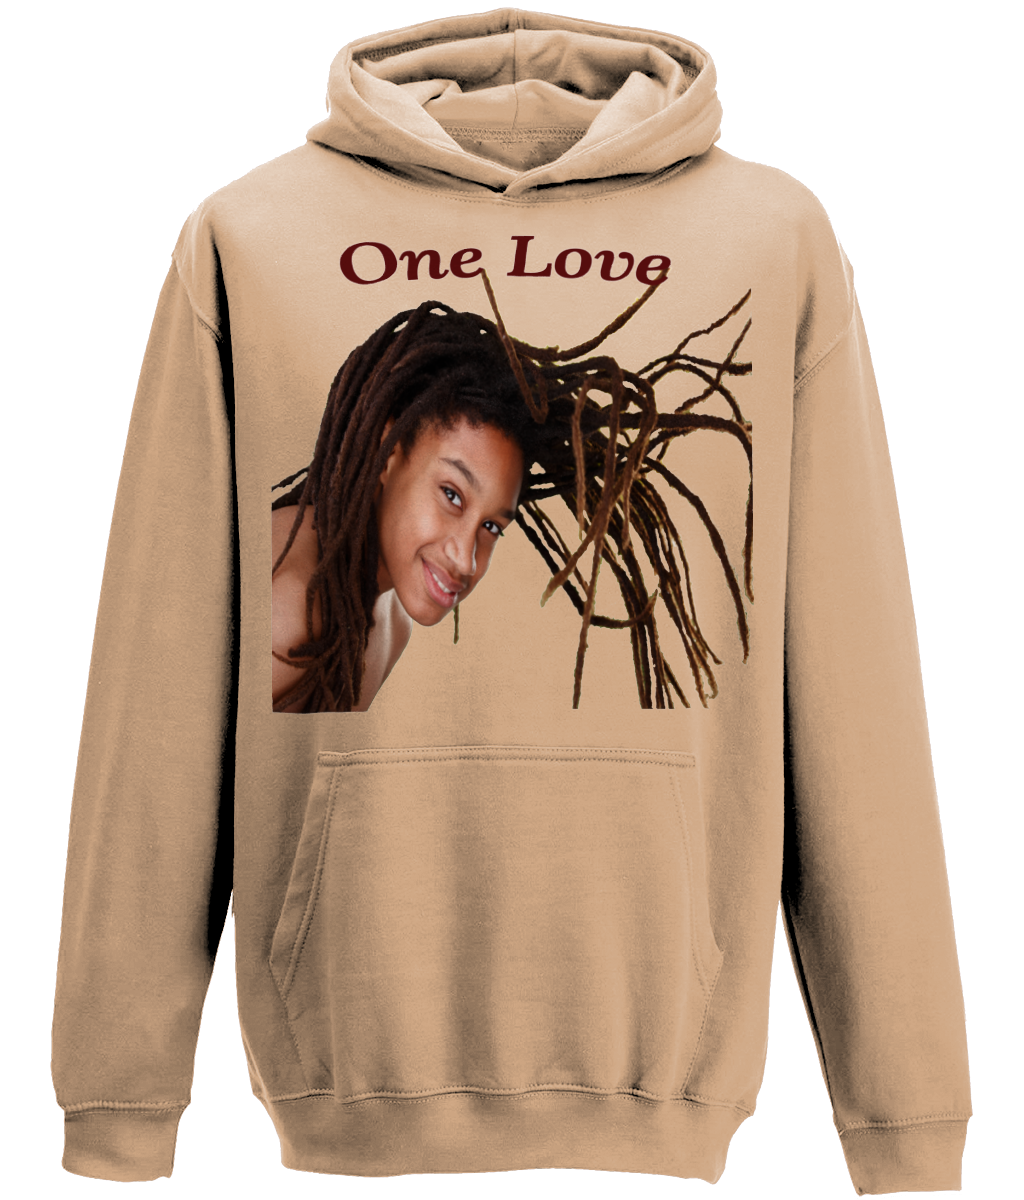 One Love Rasta Boy Hoodie - Various Colours Available - FAST UK DELIVERY